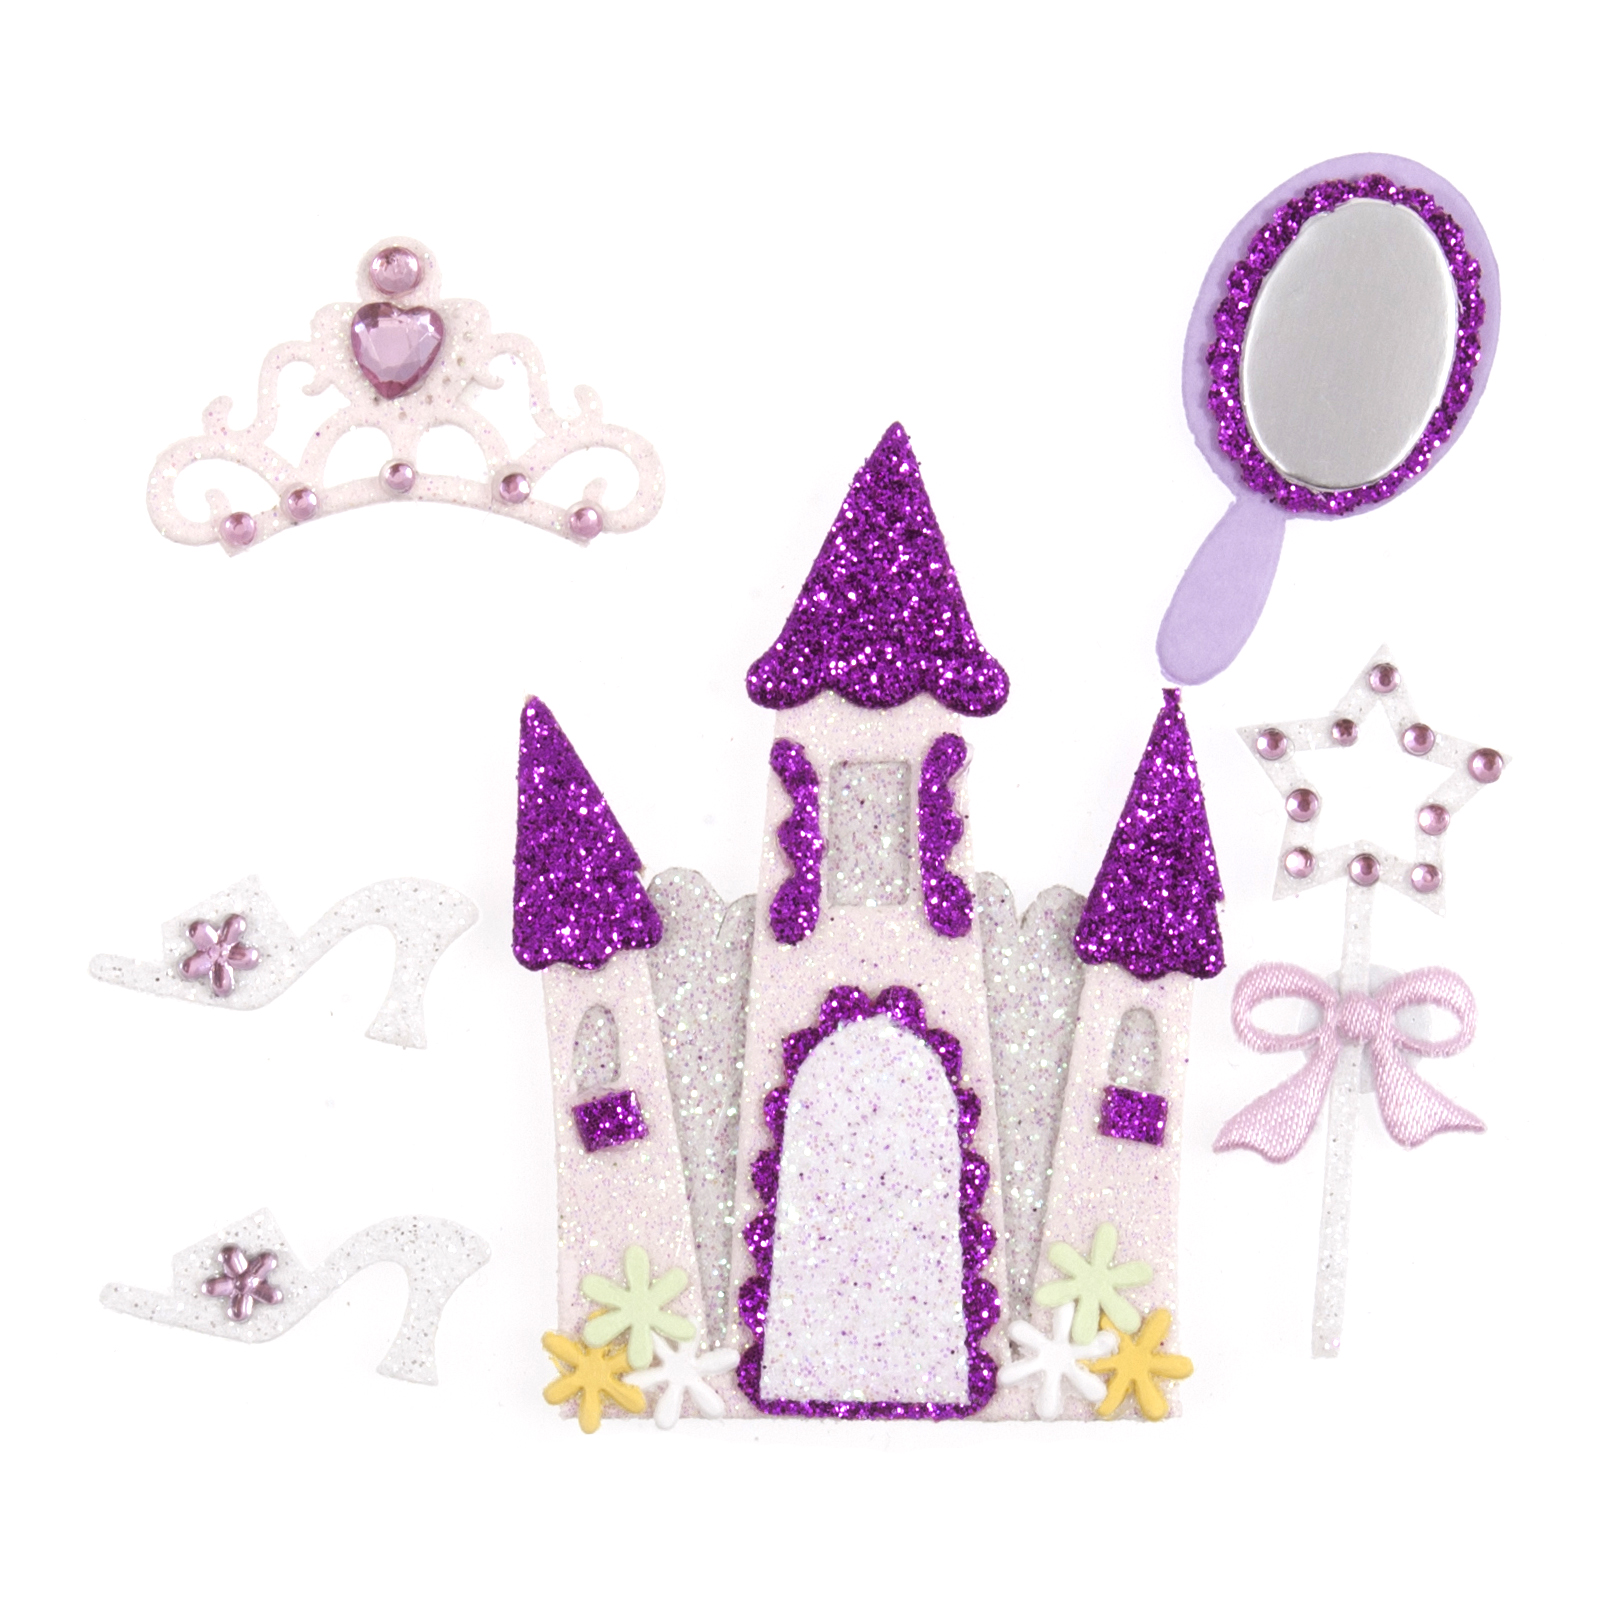 Picture of Craft Embellishments: Princess Castle Kit: Pack of 6